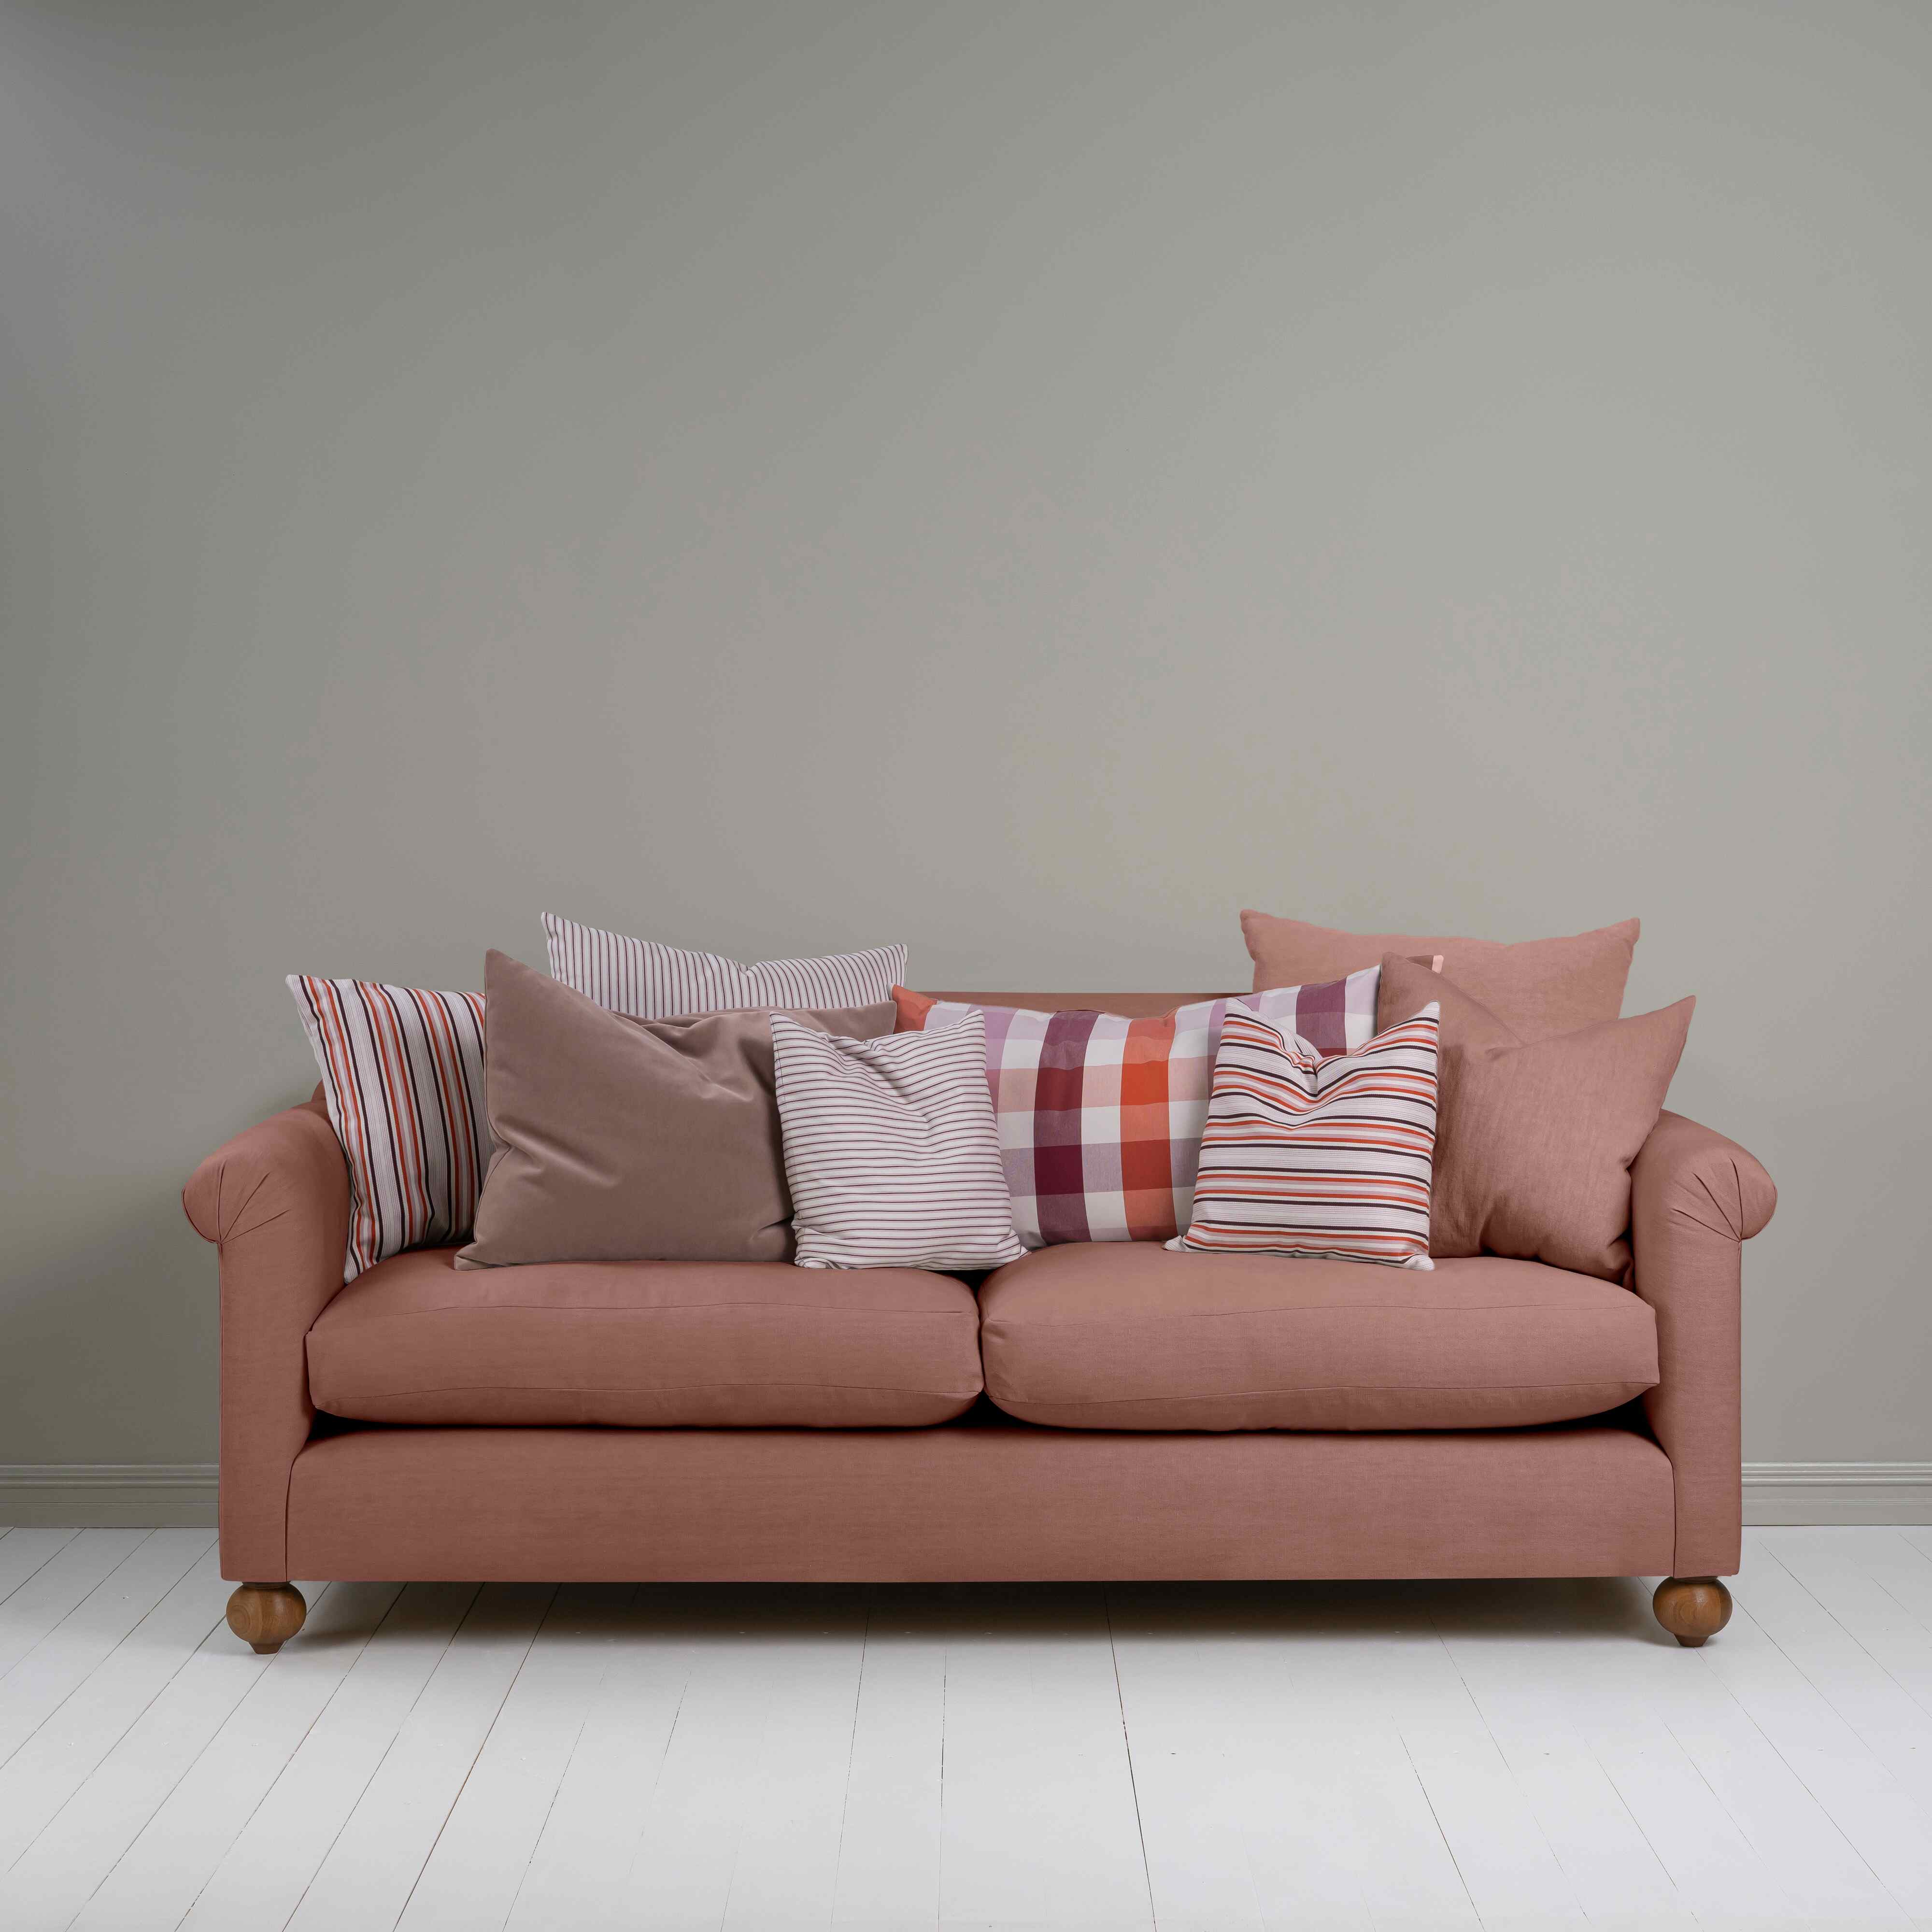  Dolittle 4 seater Sofa in Laidback Linen Sweet Briar 